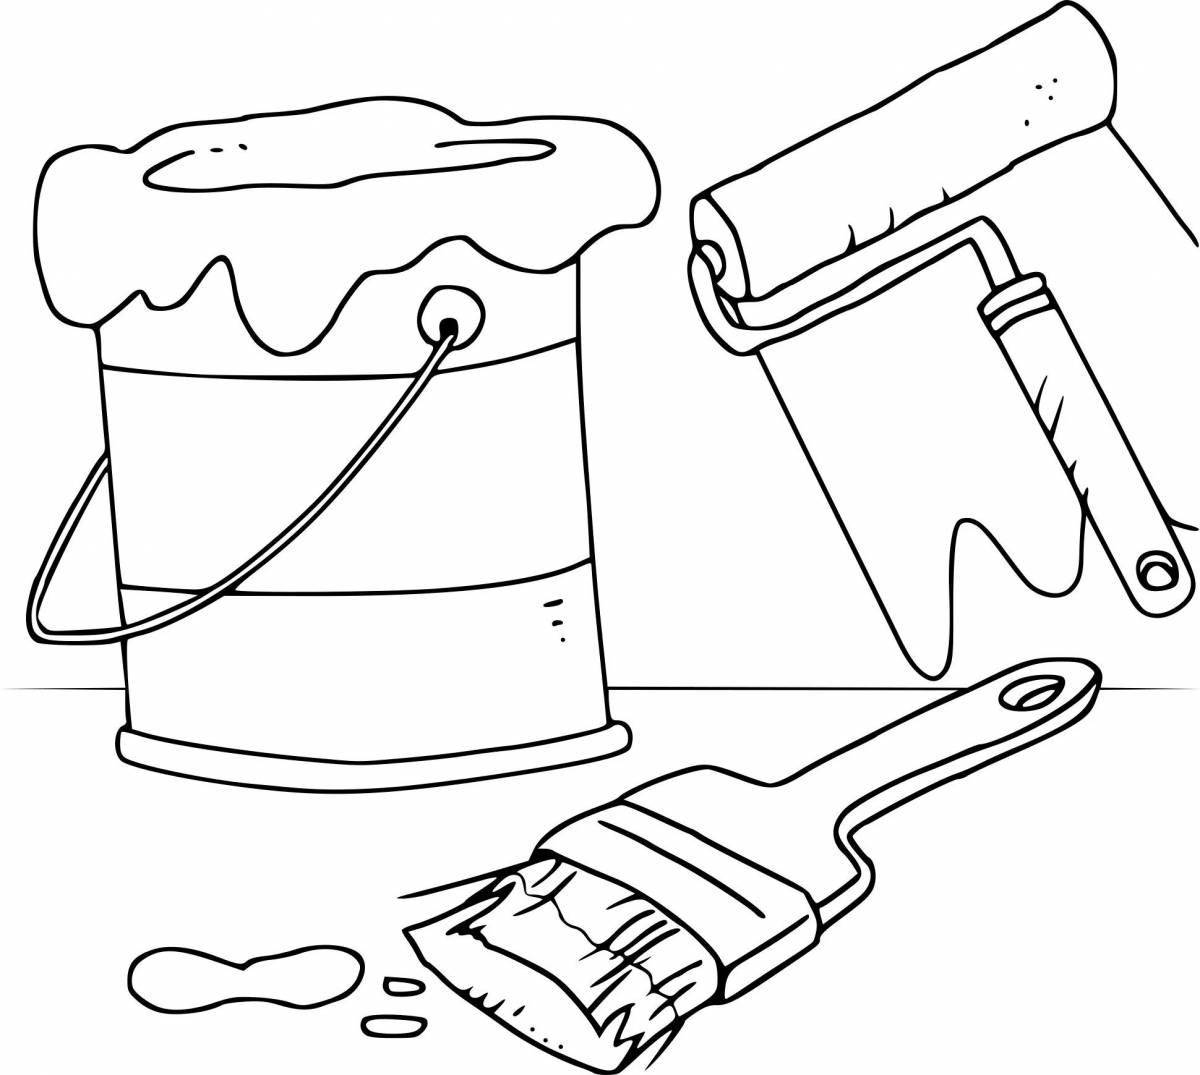 Crazy tools coloring page